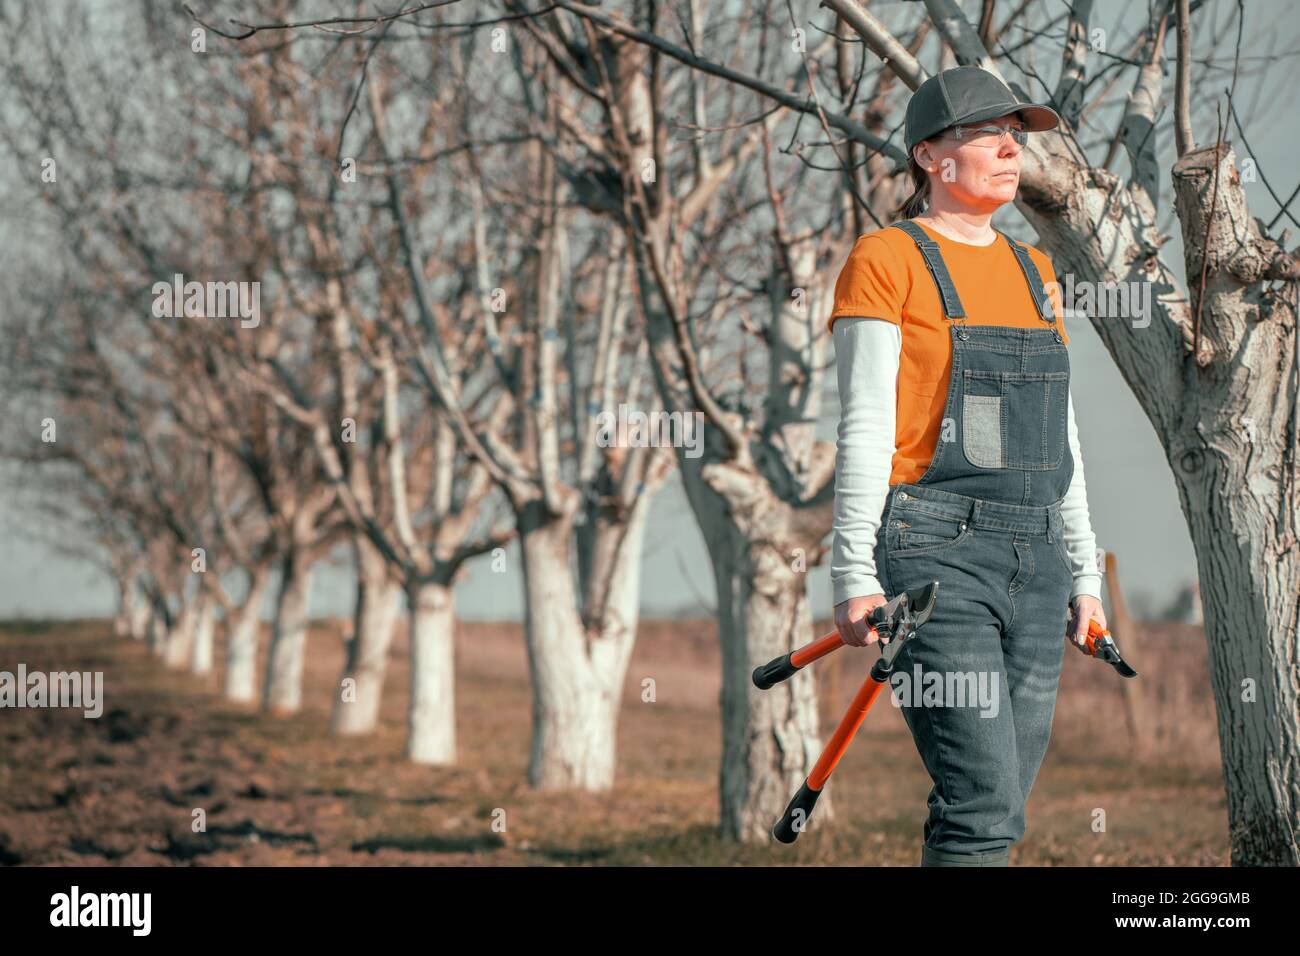 Female gardener posing with telescopic ratchet bypass lopper in walnut orchard ready for pruning on sunny spring day Stock Photo